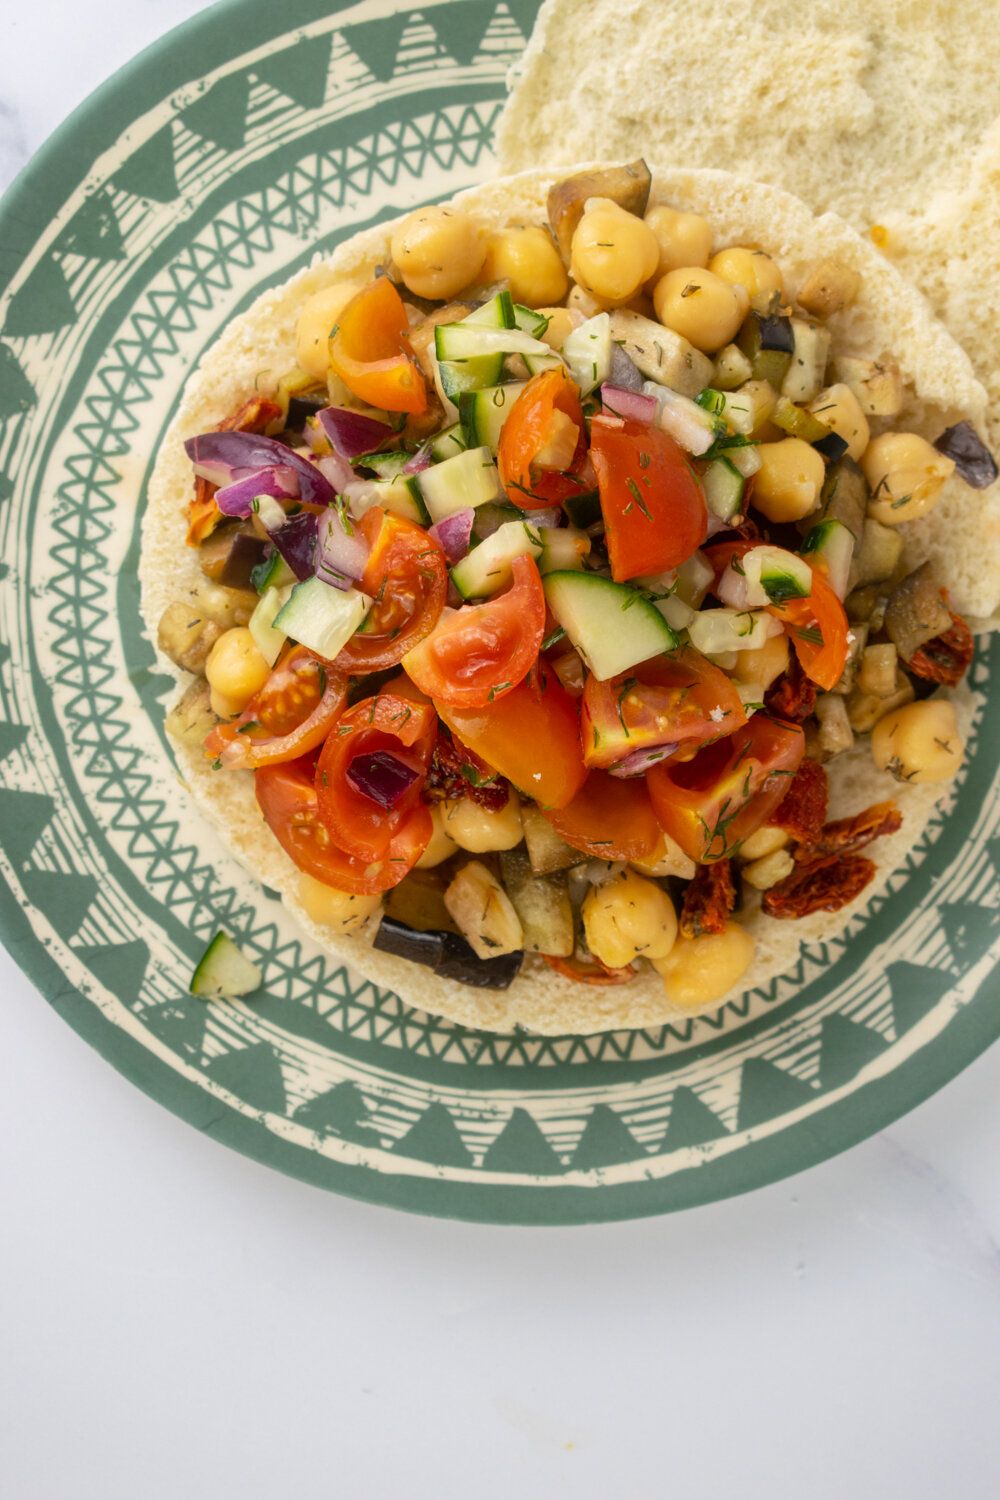 Greek eggplant tostadas with chickpeas, cucumbers, tomatoes, and red onions on a green plate.